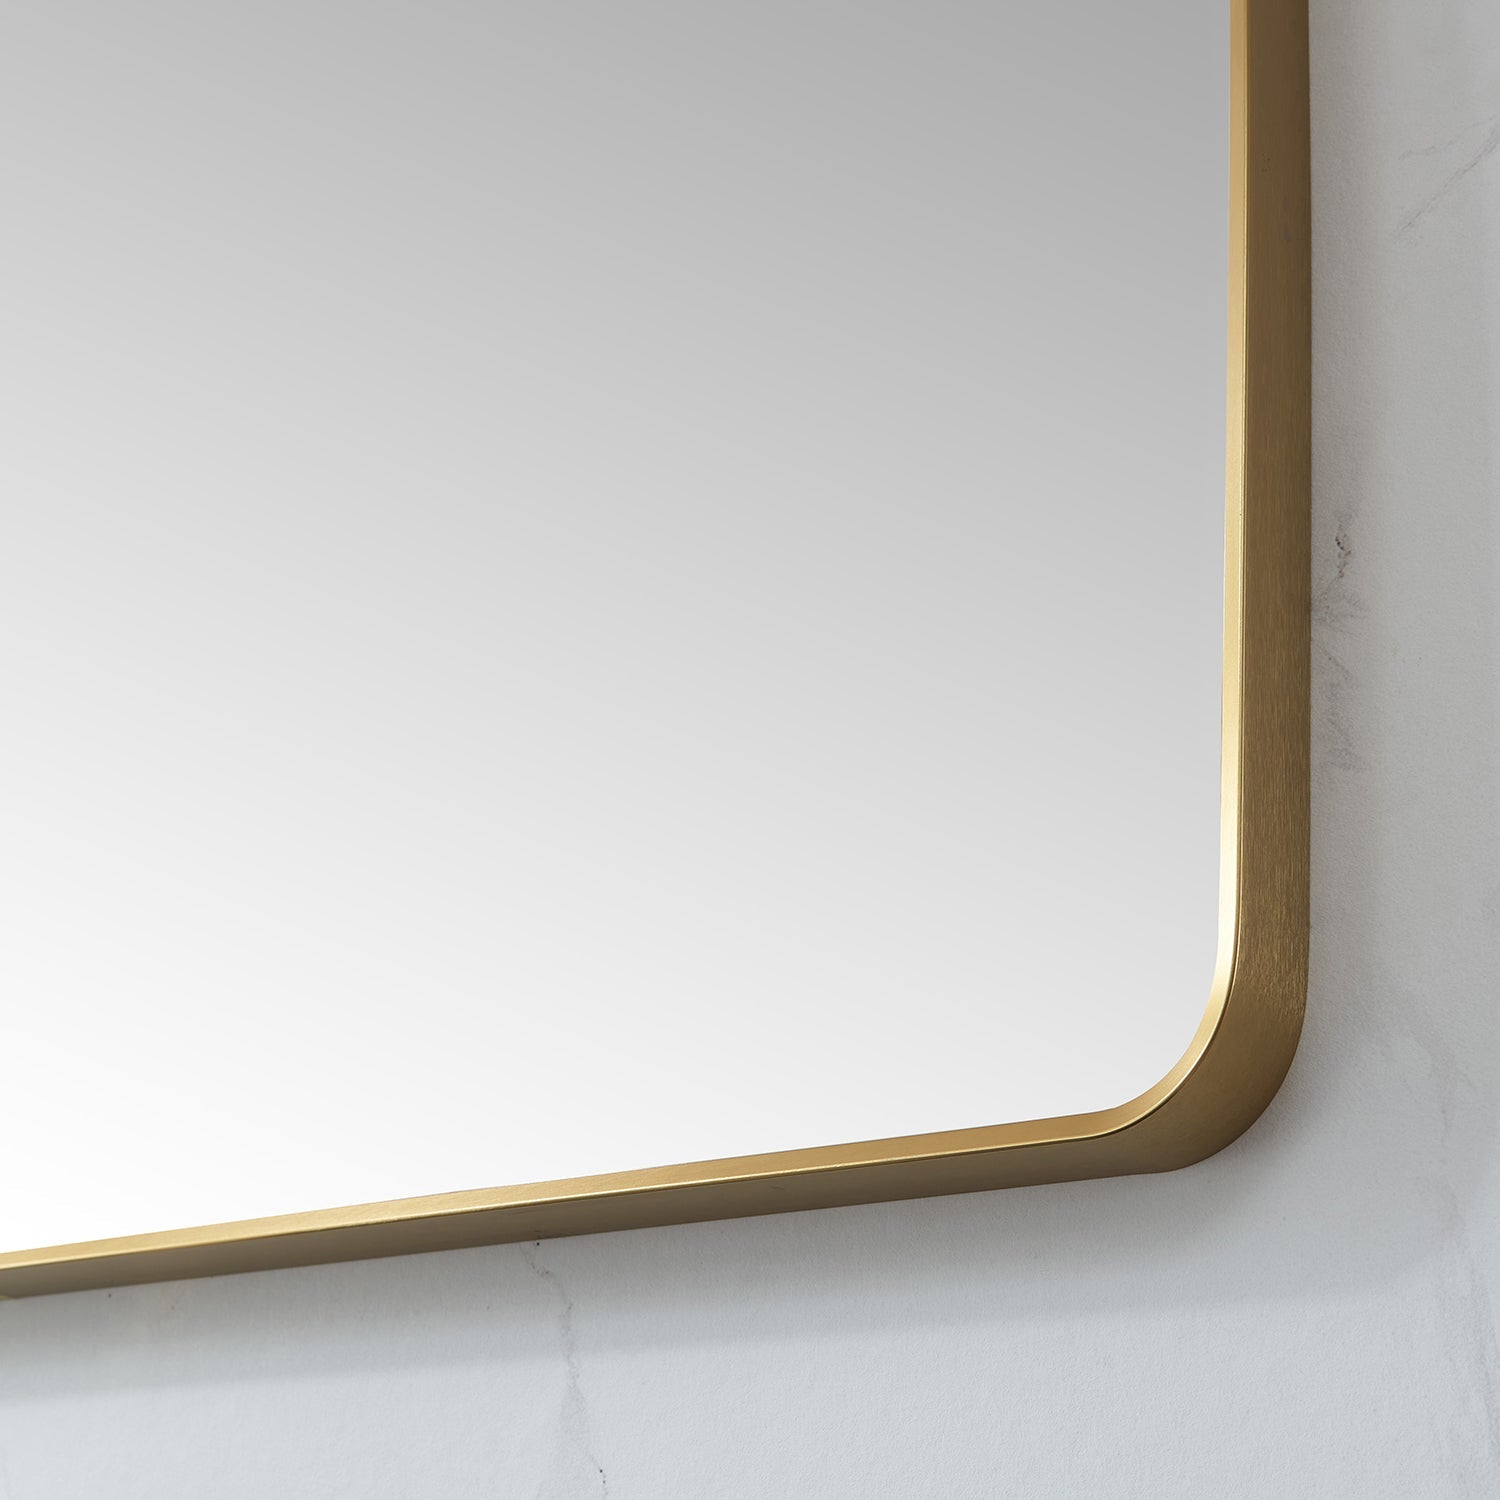 Vinnova Design Mutriku 48 in. W x 32 in. H Rectangle Metal Wall Mirror in Brushed Gold - New Star Living